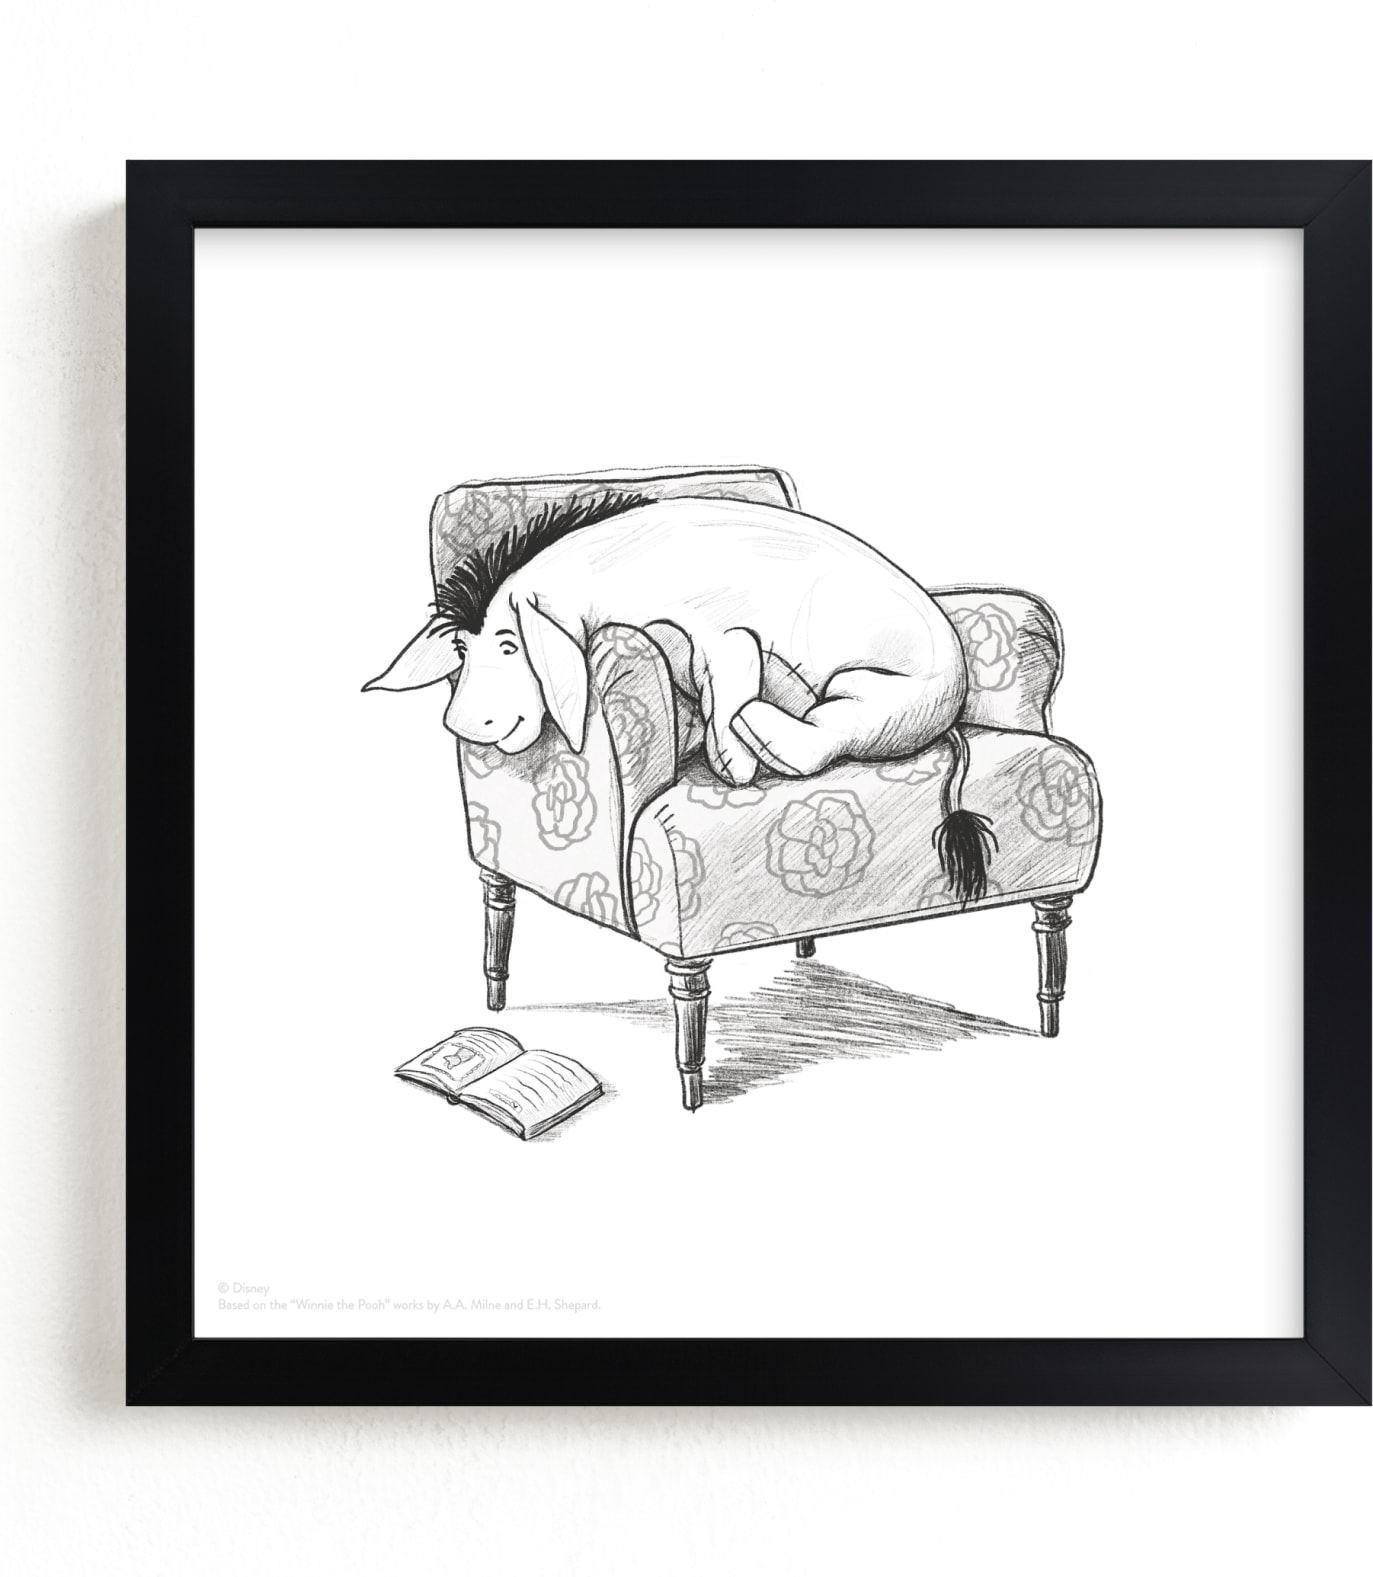 This is a black and white disney art by Stefanie Lane called Eeyore Lounging from Disney's Winnie The Pooh.